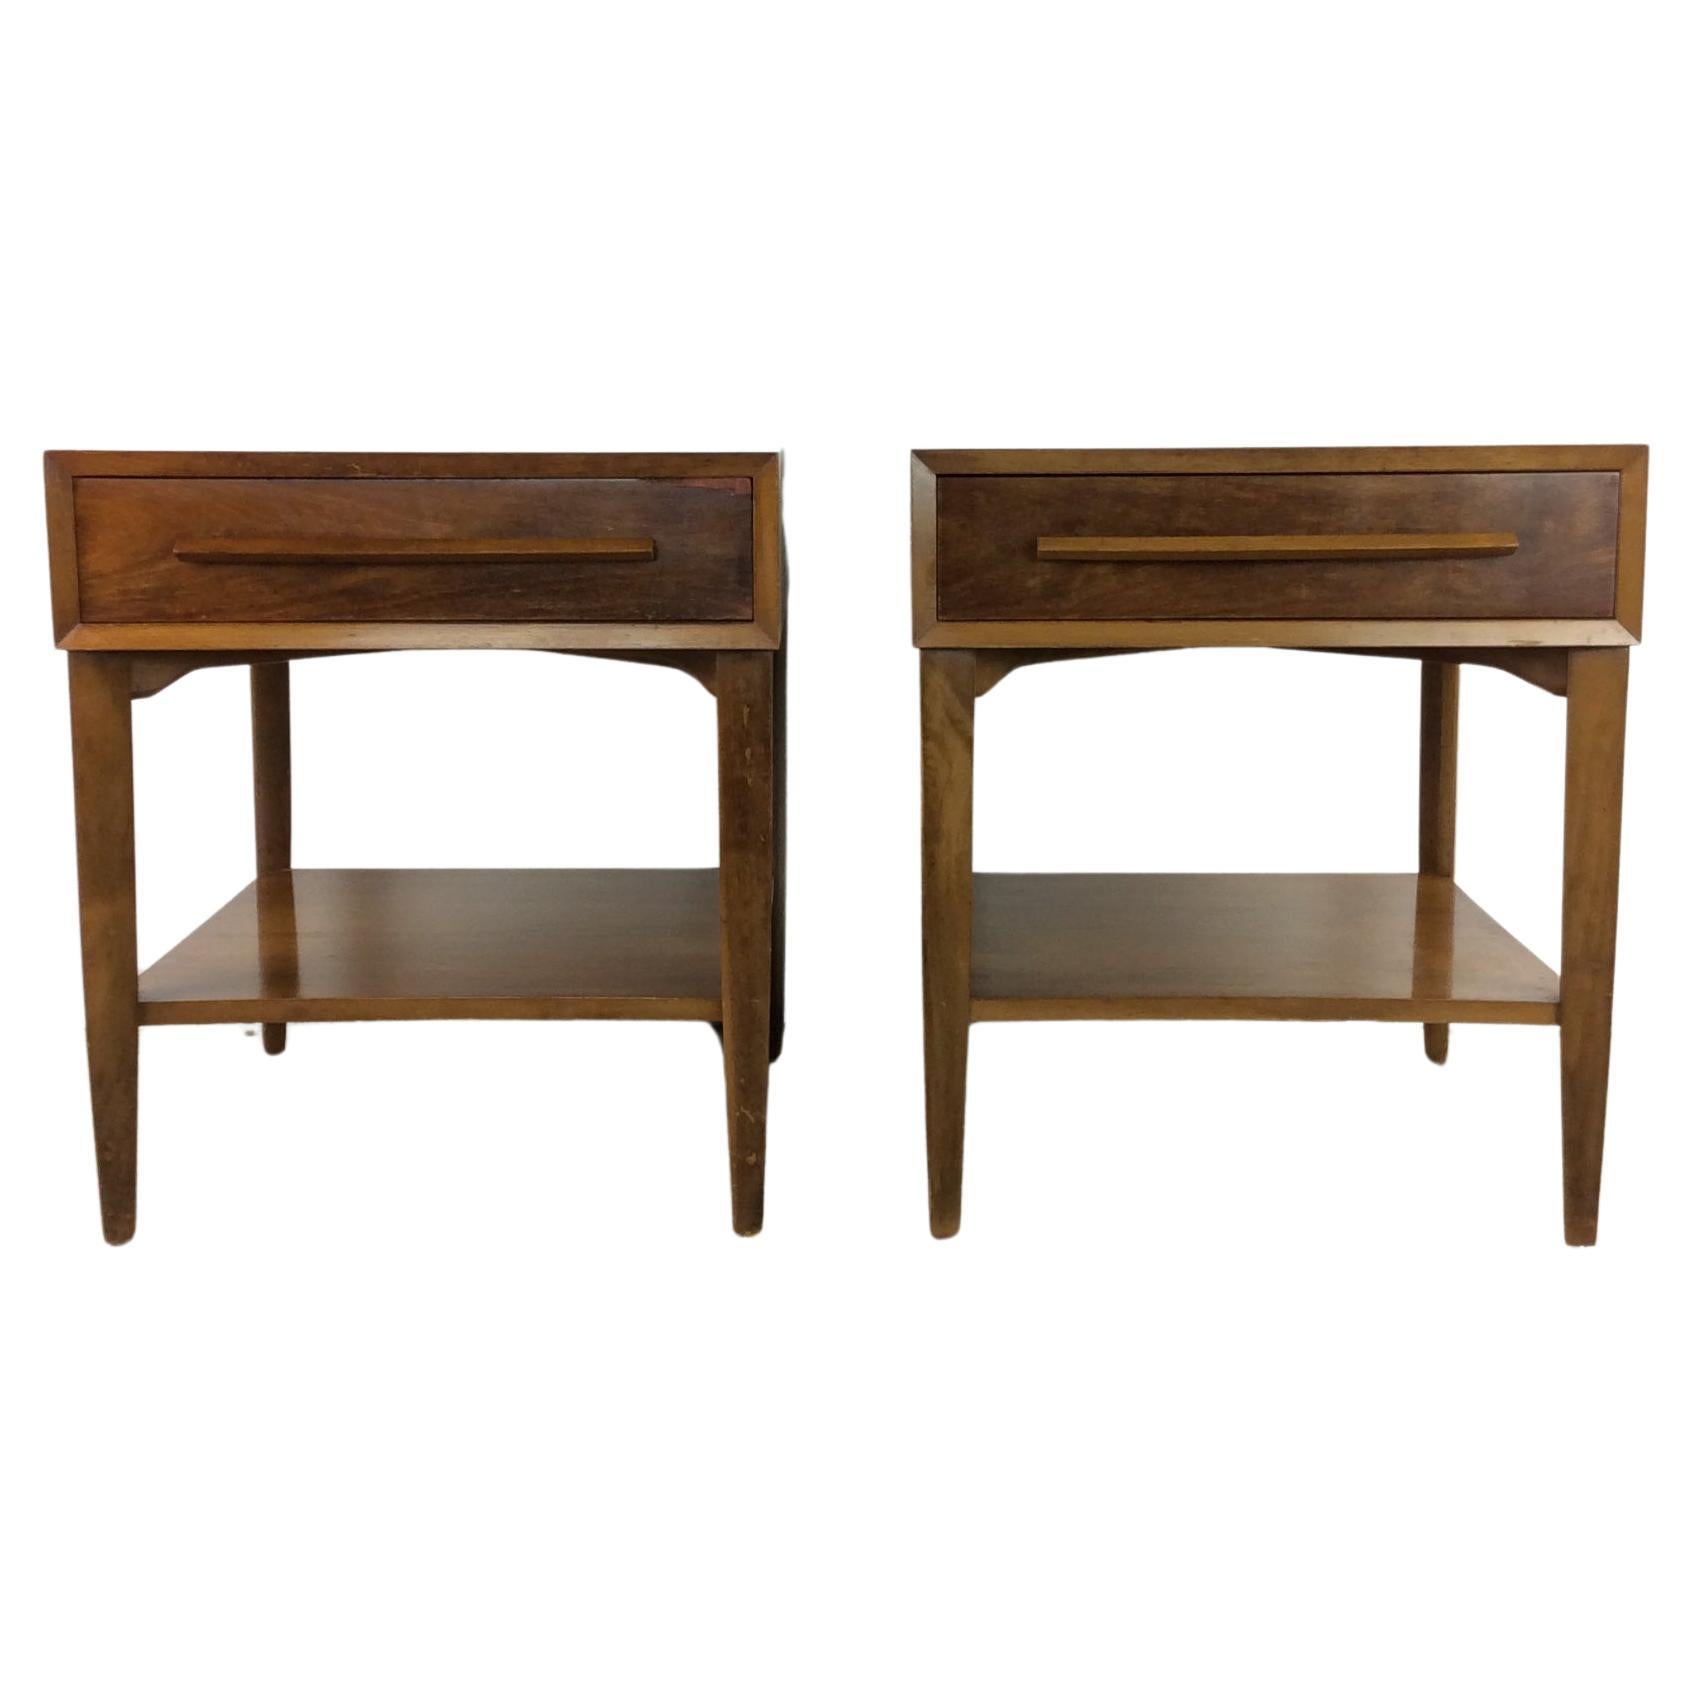 Pair of Mid Century Modern Single Drawer Nightstands by Widdicomb For Sale